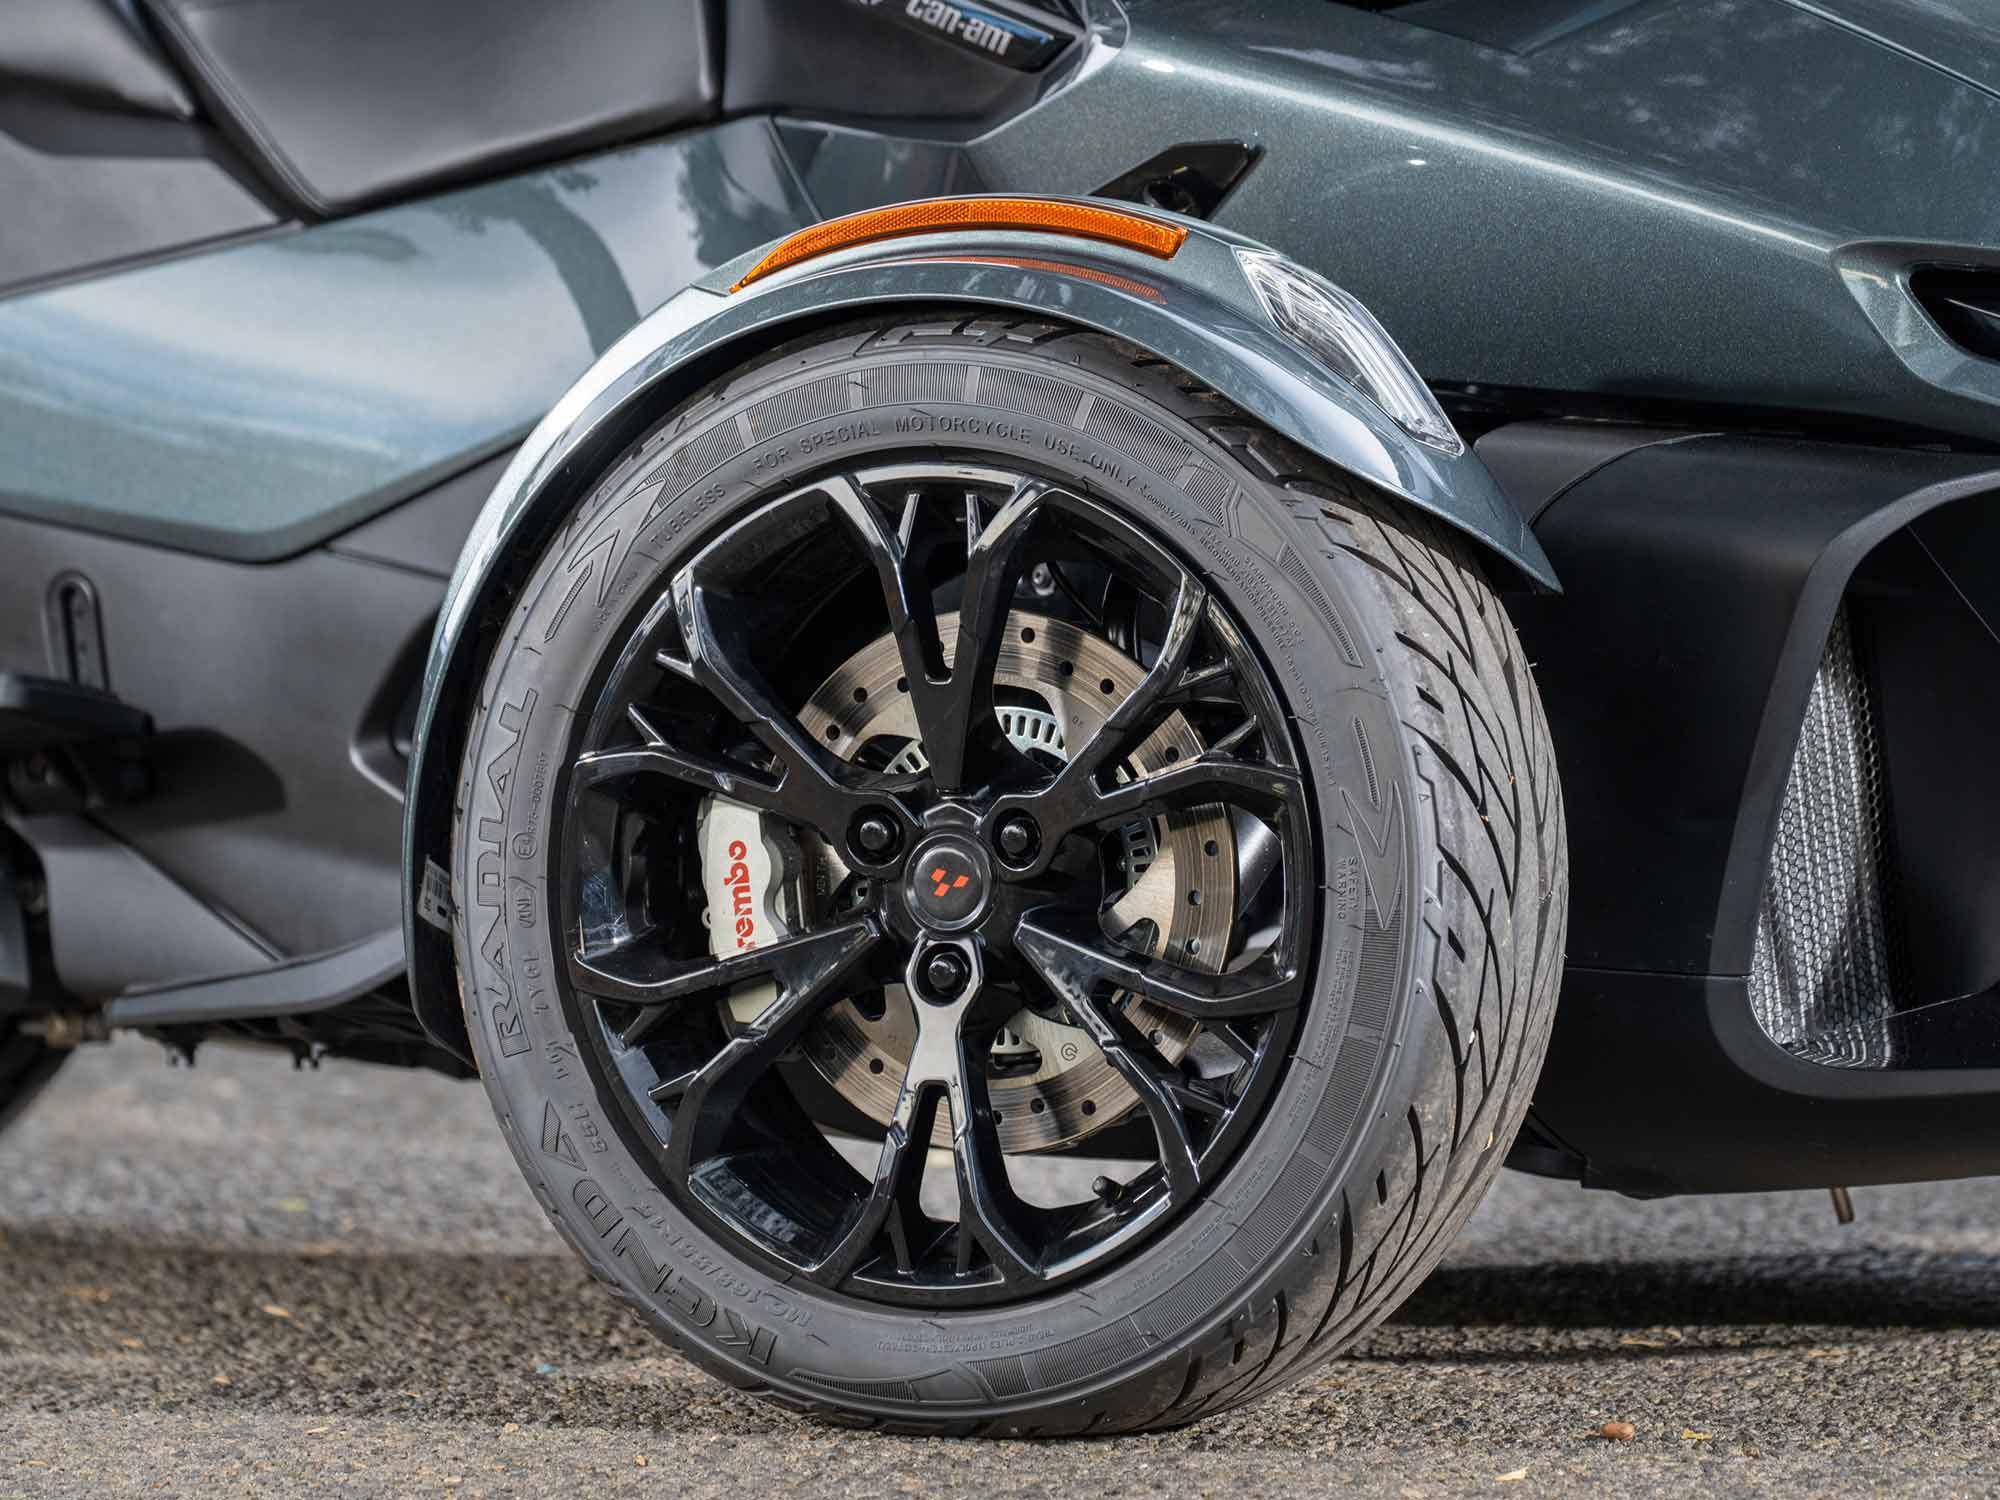 Linked triple-disc hydraulic brakes do a fine job of slowing down the nearly 1,100-pound Spyder RT Limited. The brakes are actuated by a right-hand-side foot pedal.